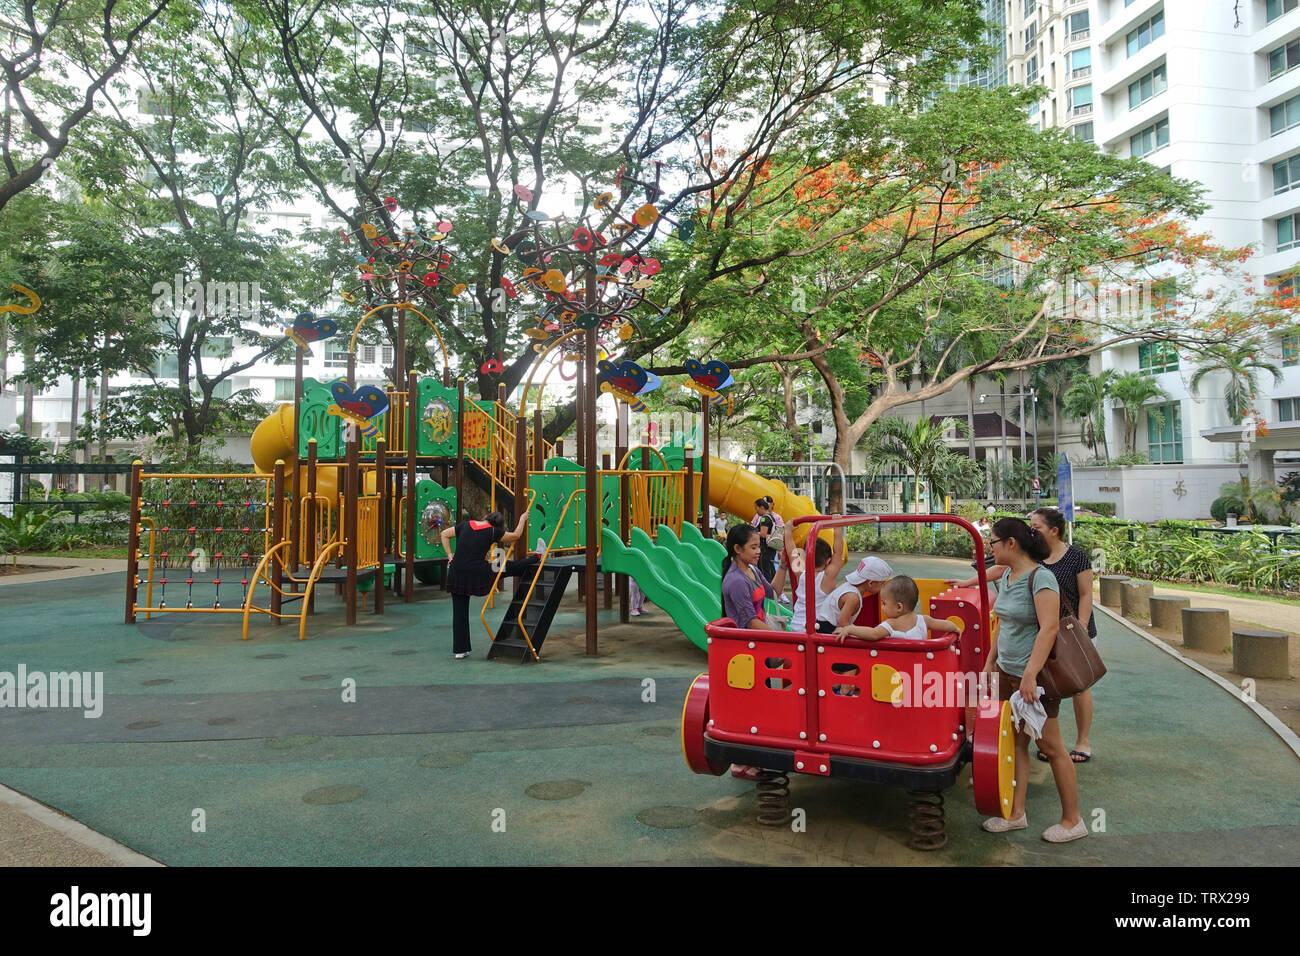 The are recreational areas for children to play while parents shop in the Salcedo Village Saturday Market. Stock Photo